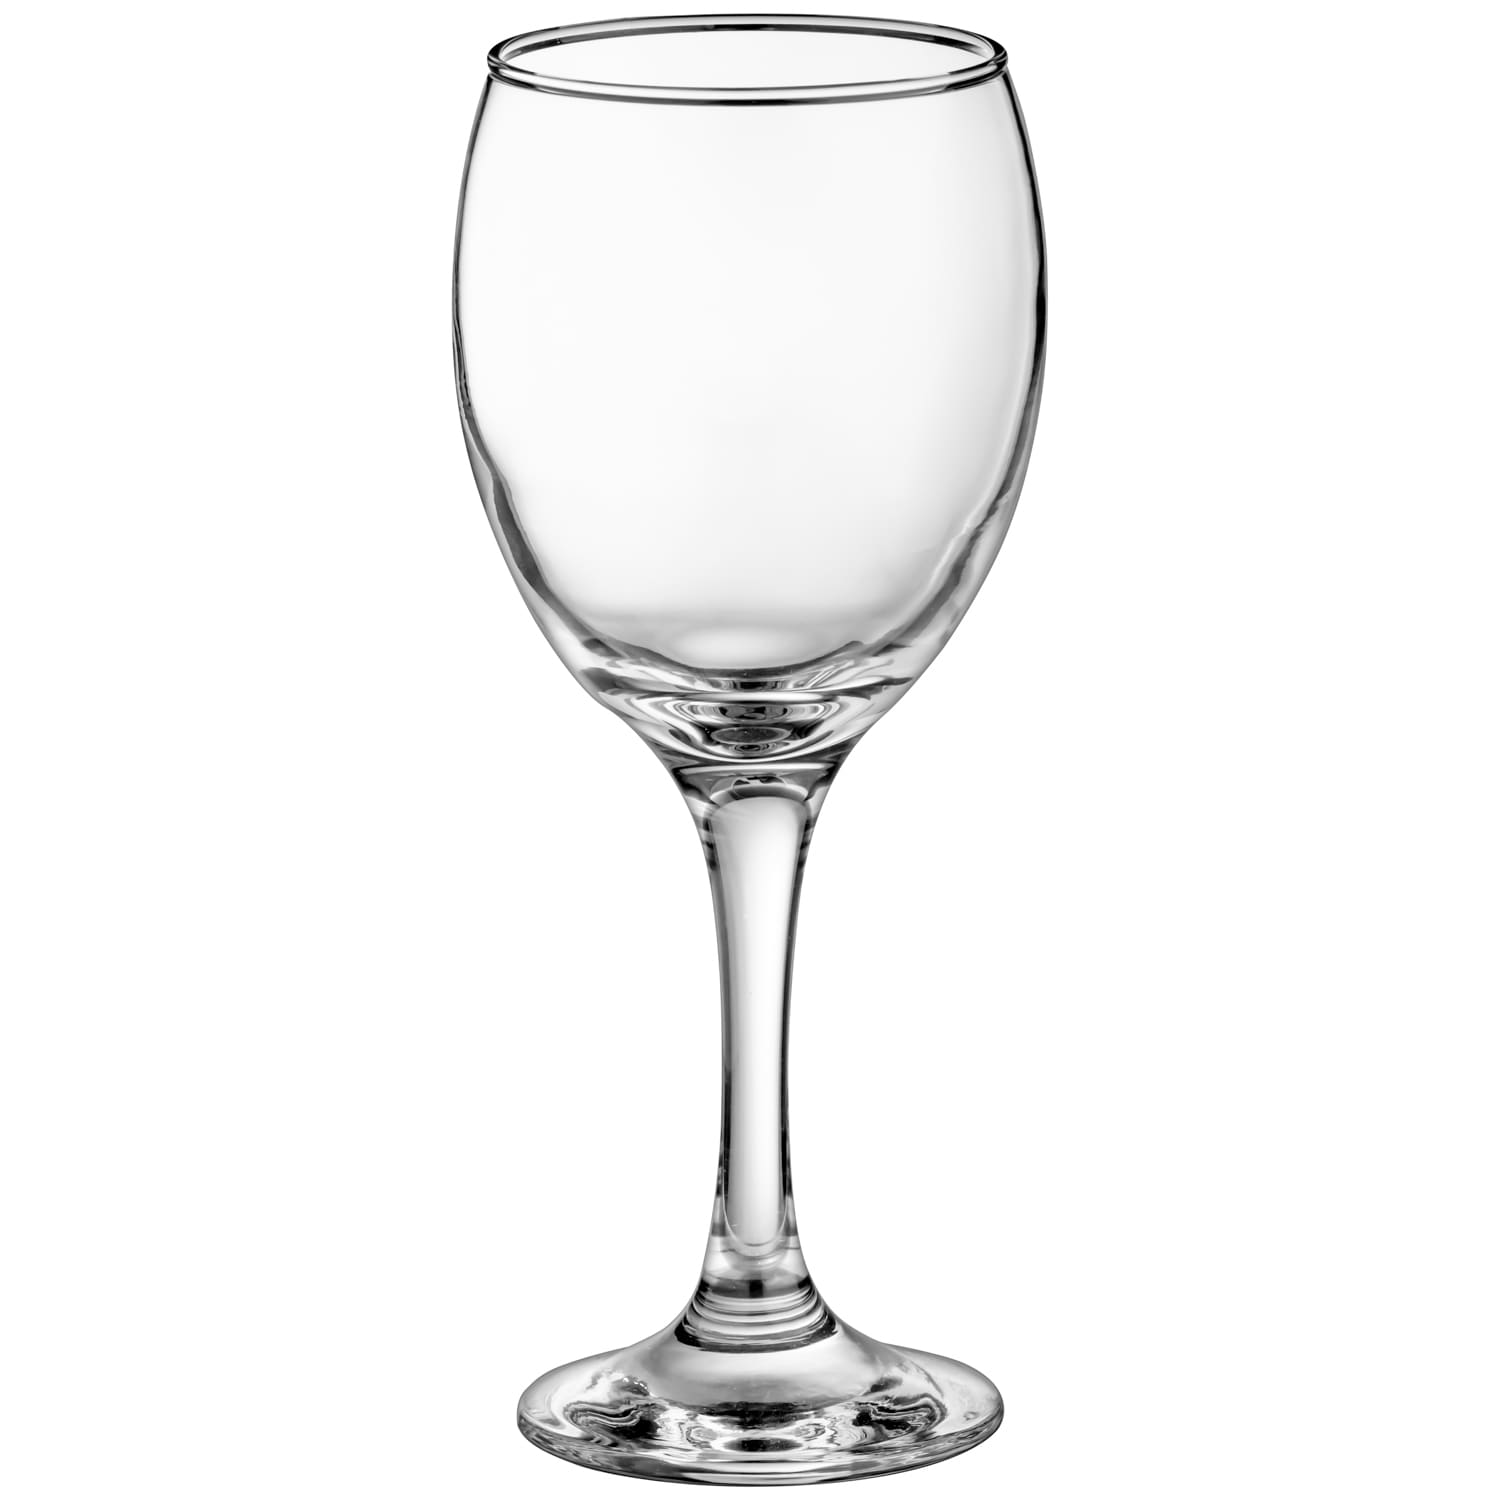 https://www.bmstores.co.uk/images/hpcProductImage/imgSource/338802-set-of-4-wine-glasses-3.jpg